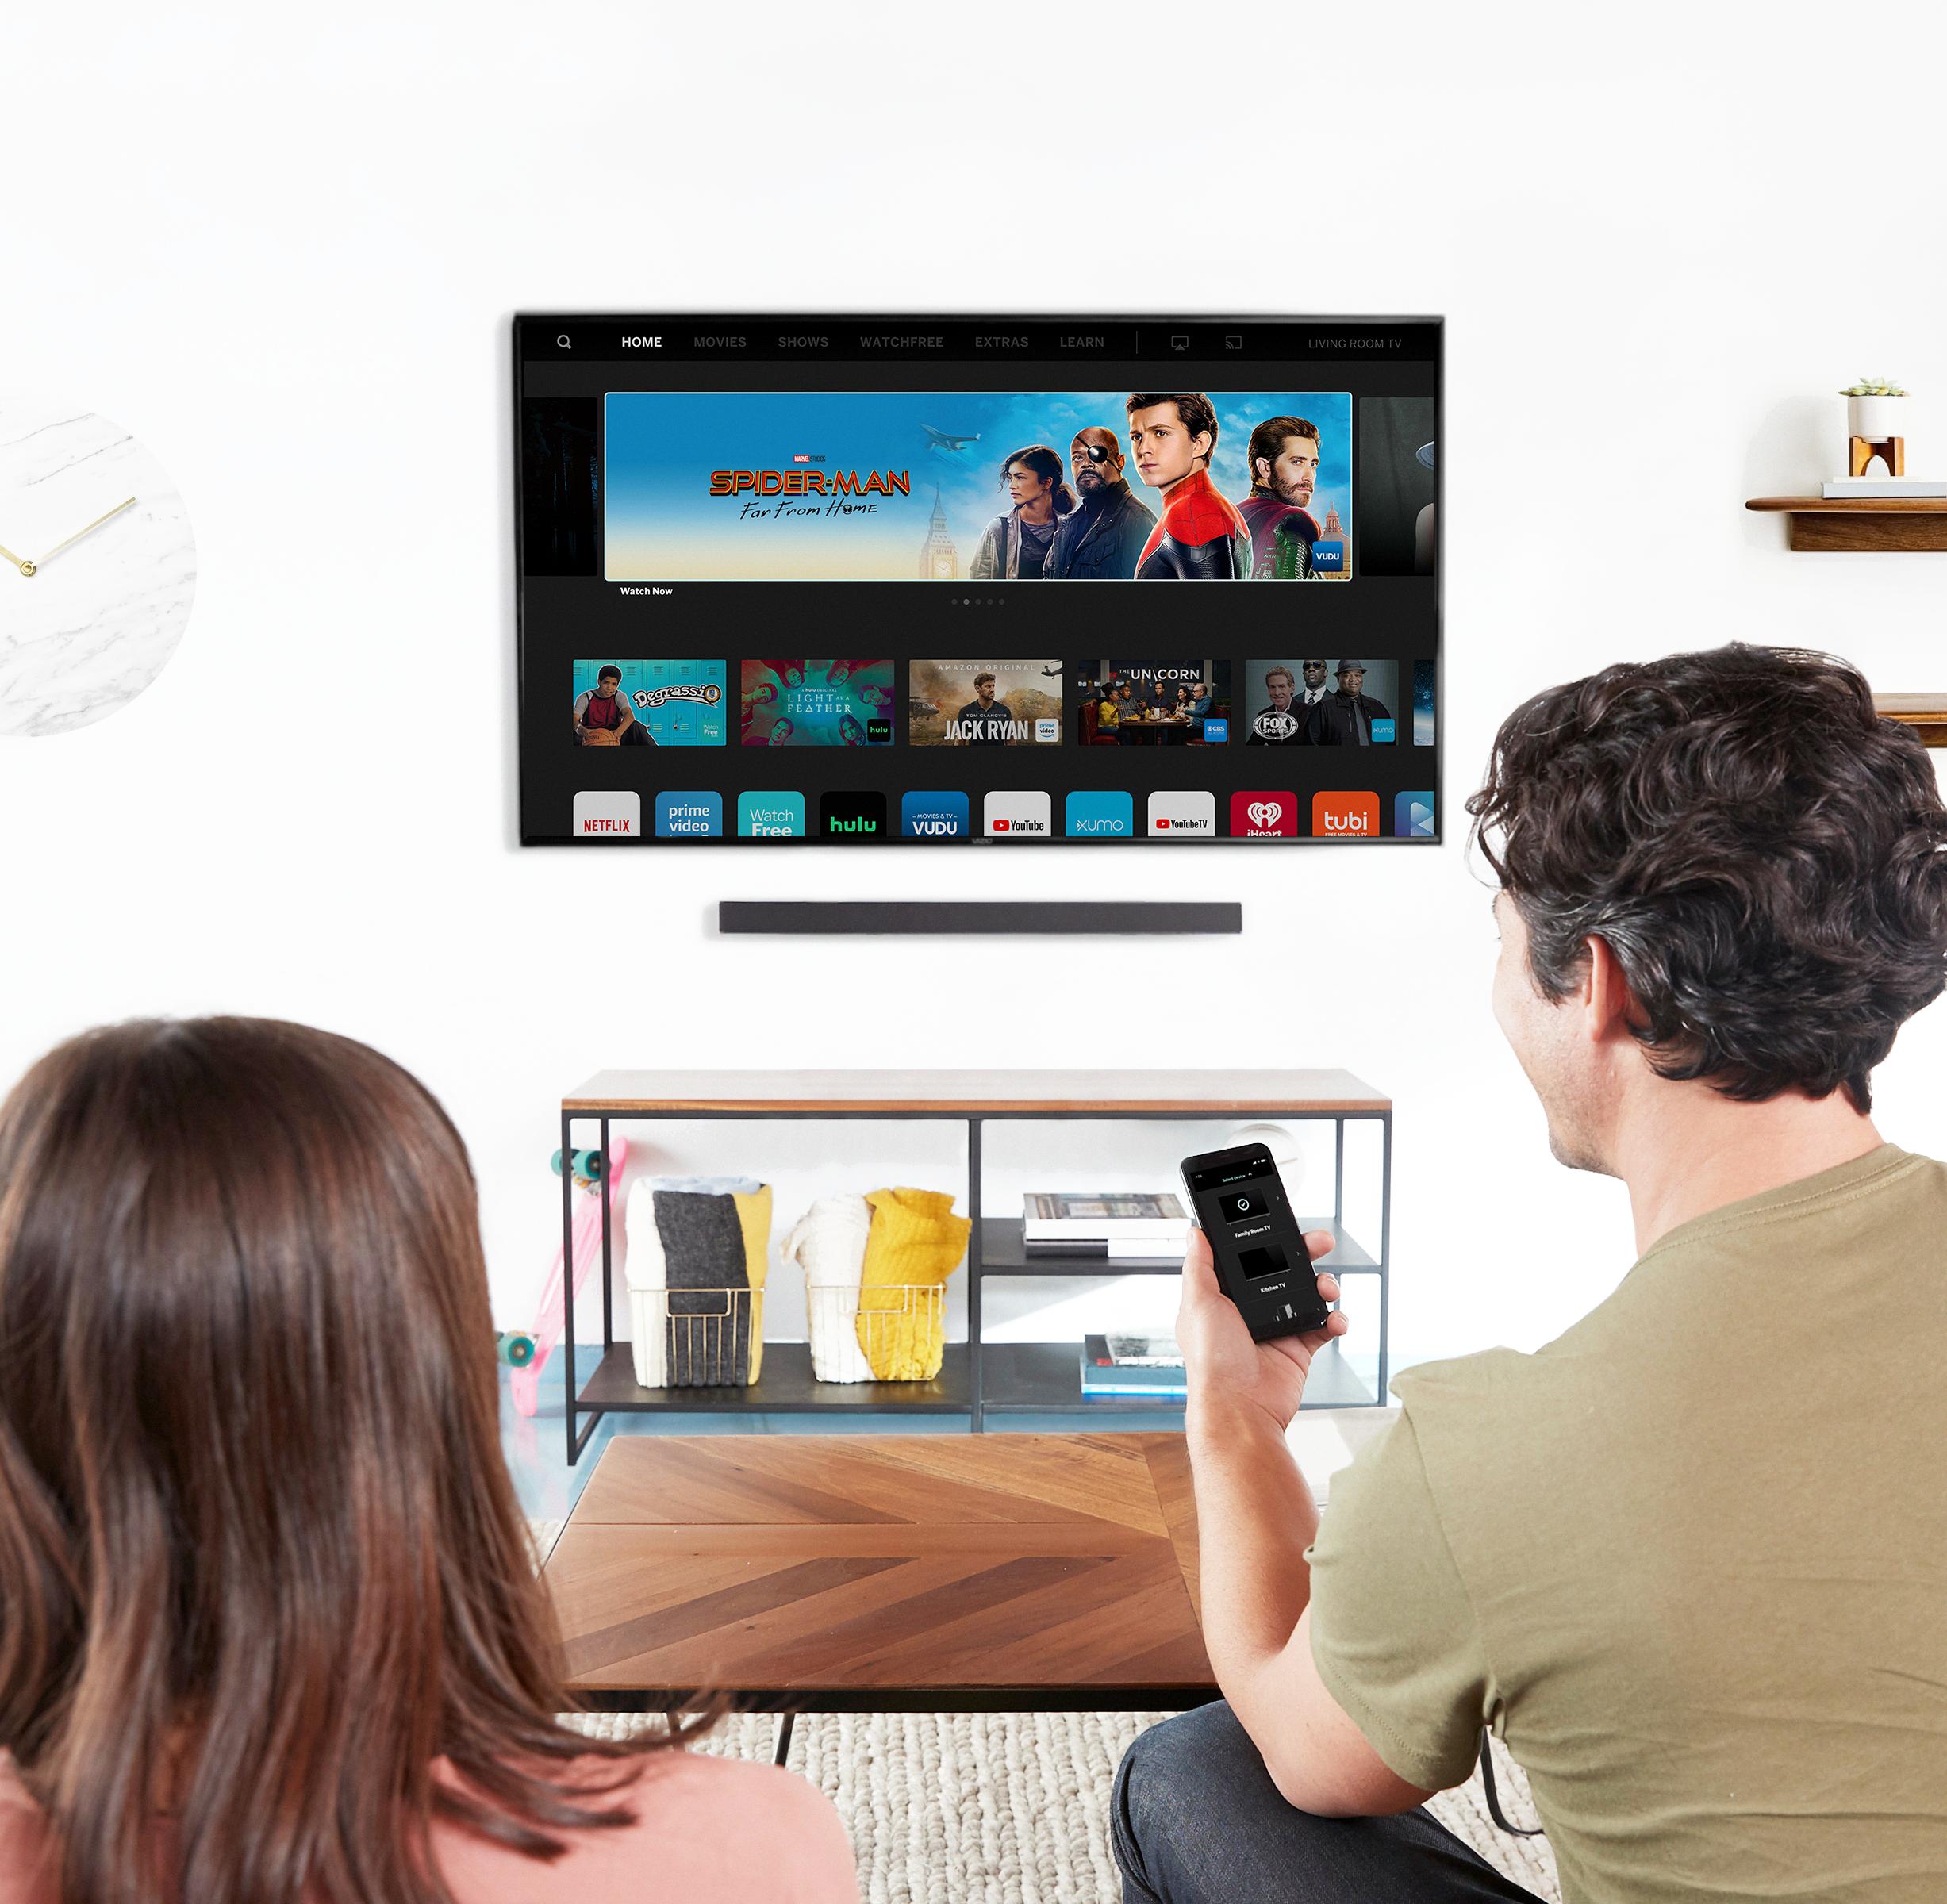 Troubleshooting Tips When Your iPhone Won't Connect to VIZIO Smart TV 5